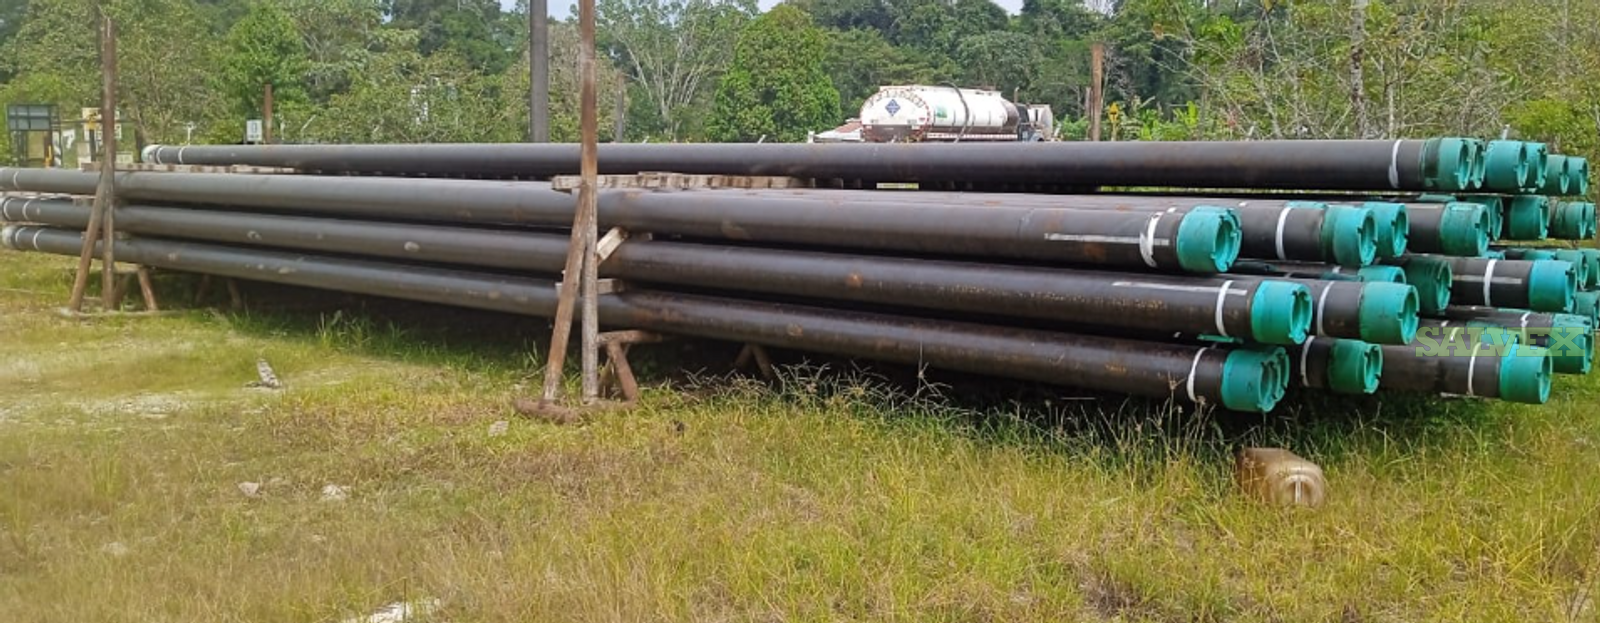 7, 9 5/8 and 13 3/8 Surplus Casing (29 Metric Tons)